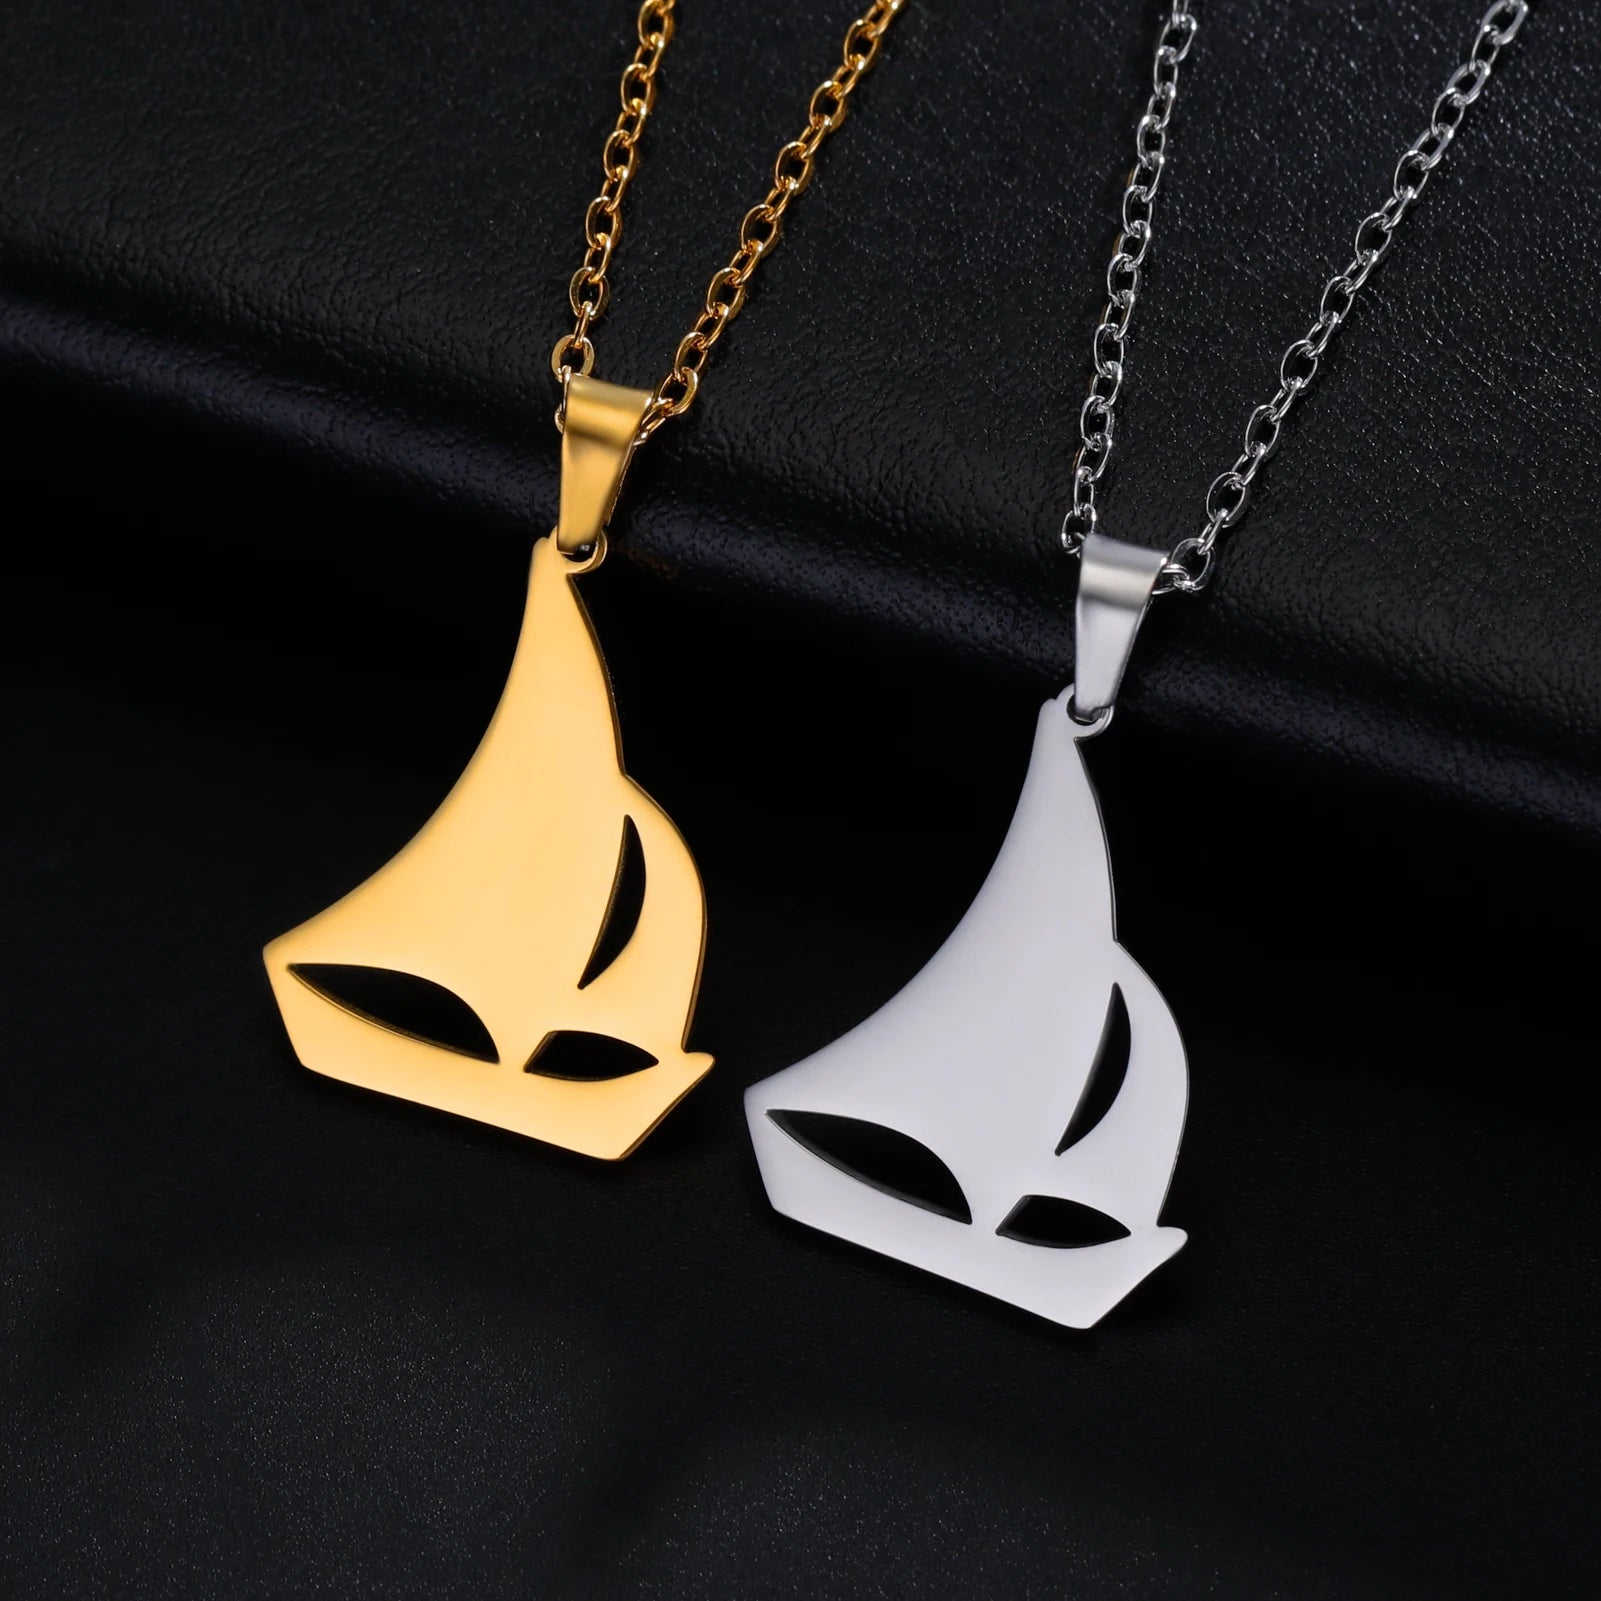 Sailboat Stainless Steel Ocean Necklace